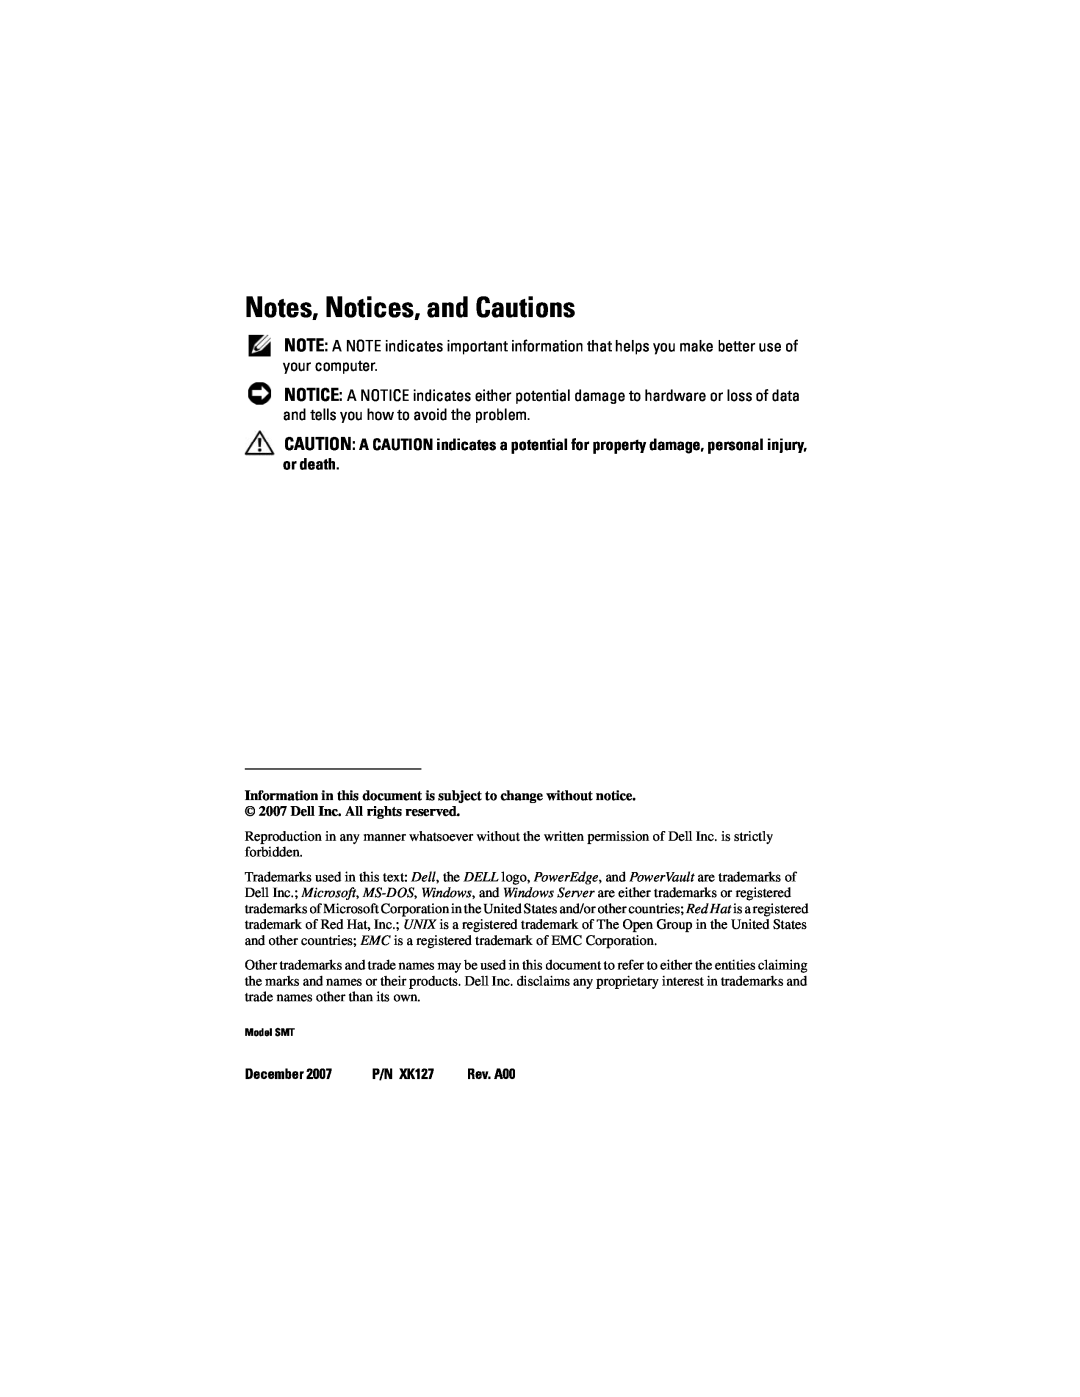 Dell R300 owner manual Notes, Notices, and Cautions, December, P/N XK127 